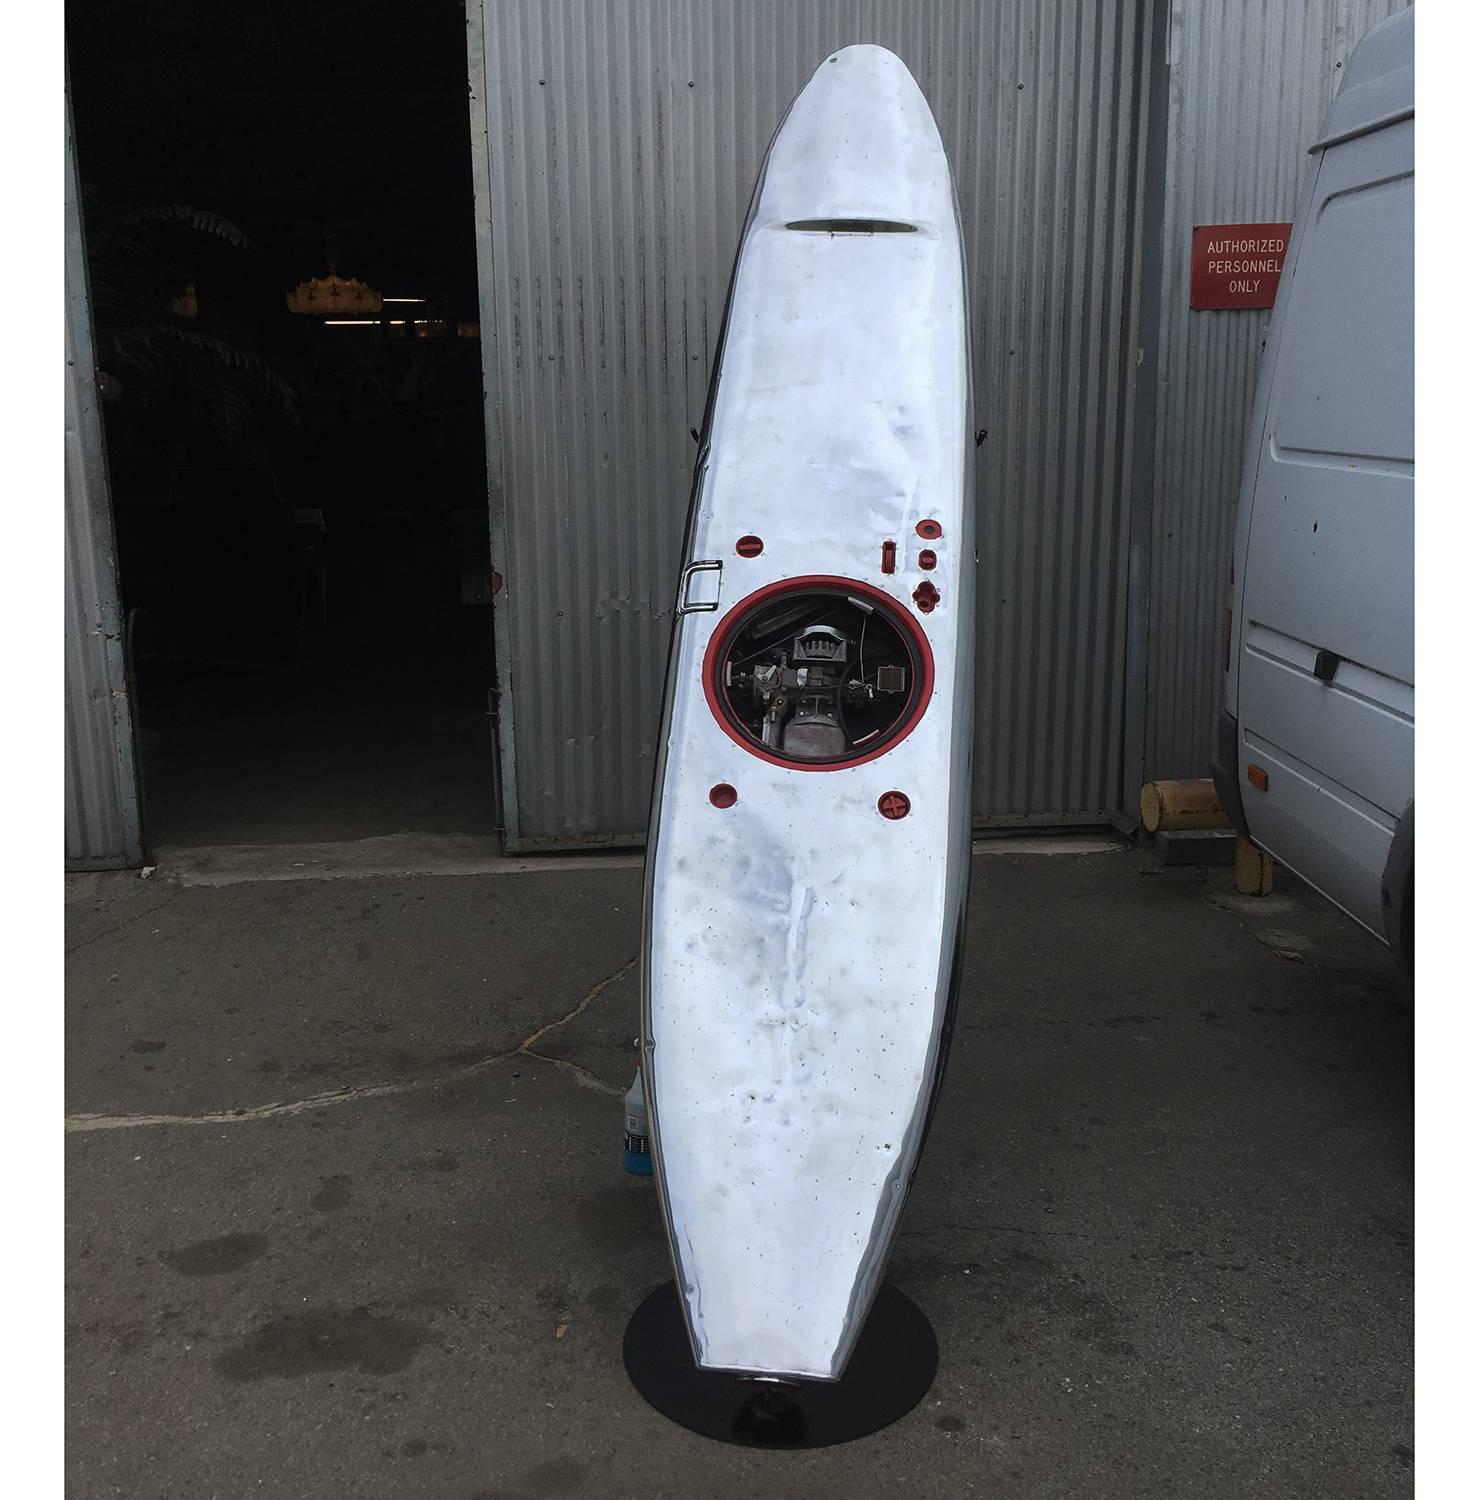 Produced from 1965 to 1968, the jet board was the design of a former Boeing Aviation engineer. The aluminum surfboard is powered by a 6.25 horsepower Tecumseh engine and jet propulsion system. Air is vented through the front of the board and